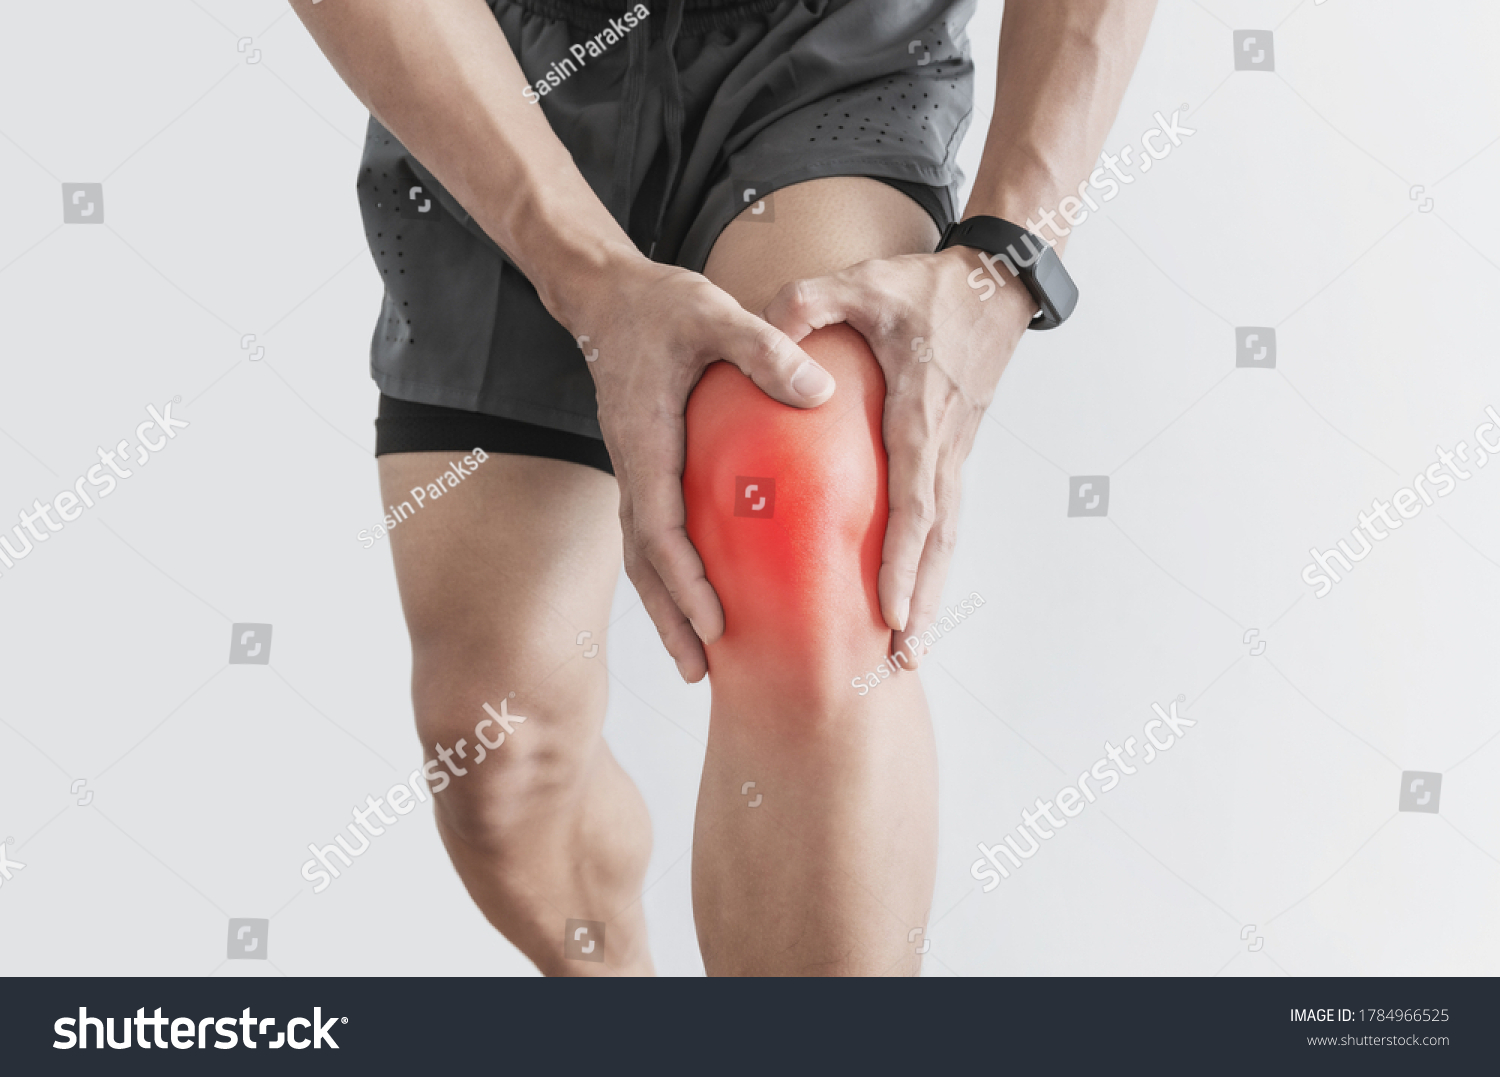 Joint pain, Arthritis and tendon problems. a man touching nee at pain point, isolated on white background #1784966525